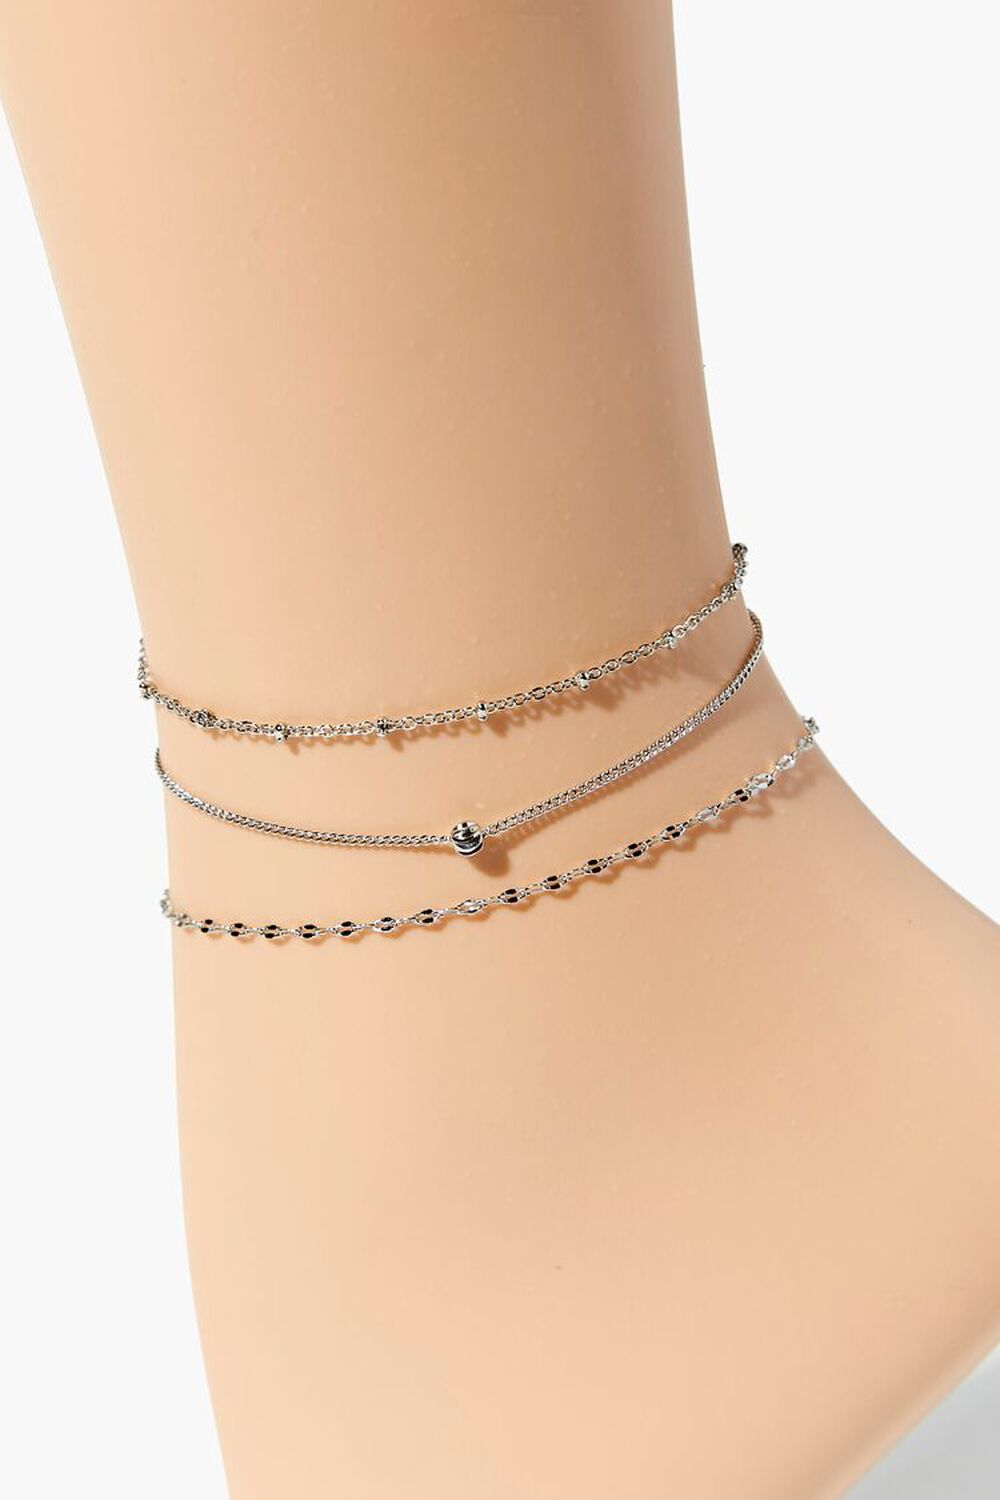 SILVER/CLEAR Assorted Chain Anklet Set, image 1